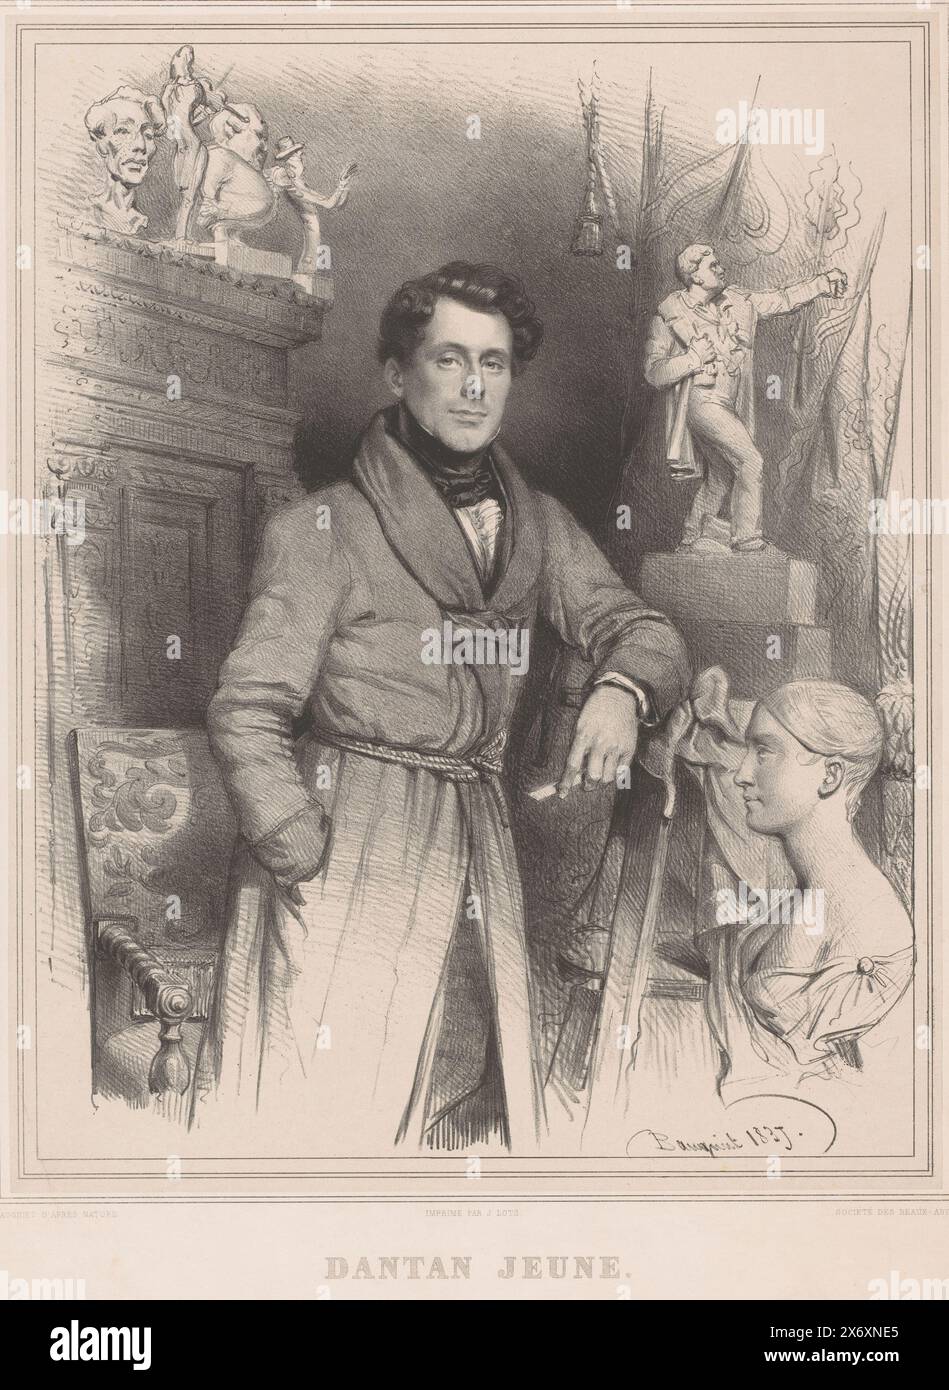 Portrait of Jean-Pierre Dantan, Dantan jeune (title on object), print, print maker: Charles Baugniet, (mentioned on object), after own design by: Charles Baugniet, (mentioned on object), printer: J. Lots, (mentioned on object), Brussels, 1837, paper, height, 552 mm × width, 410 mm Stock Photo